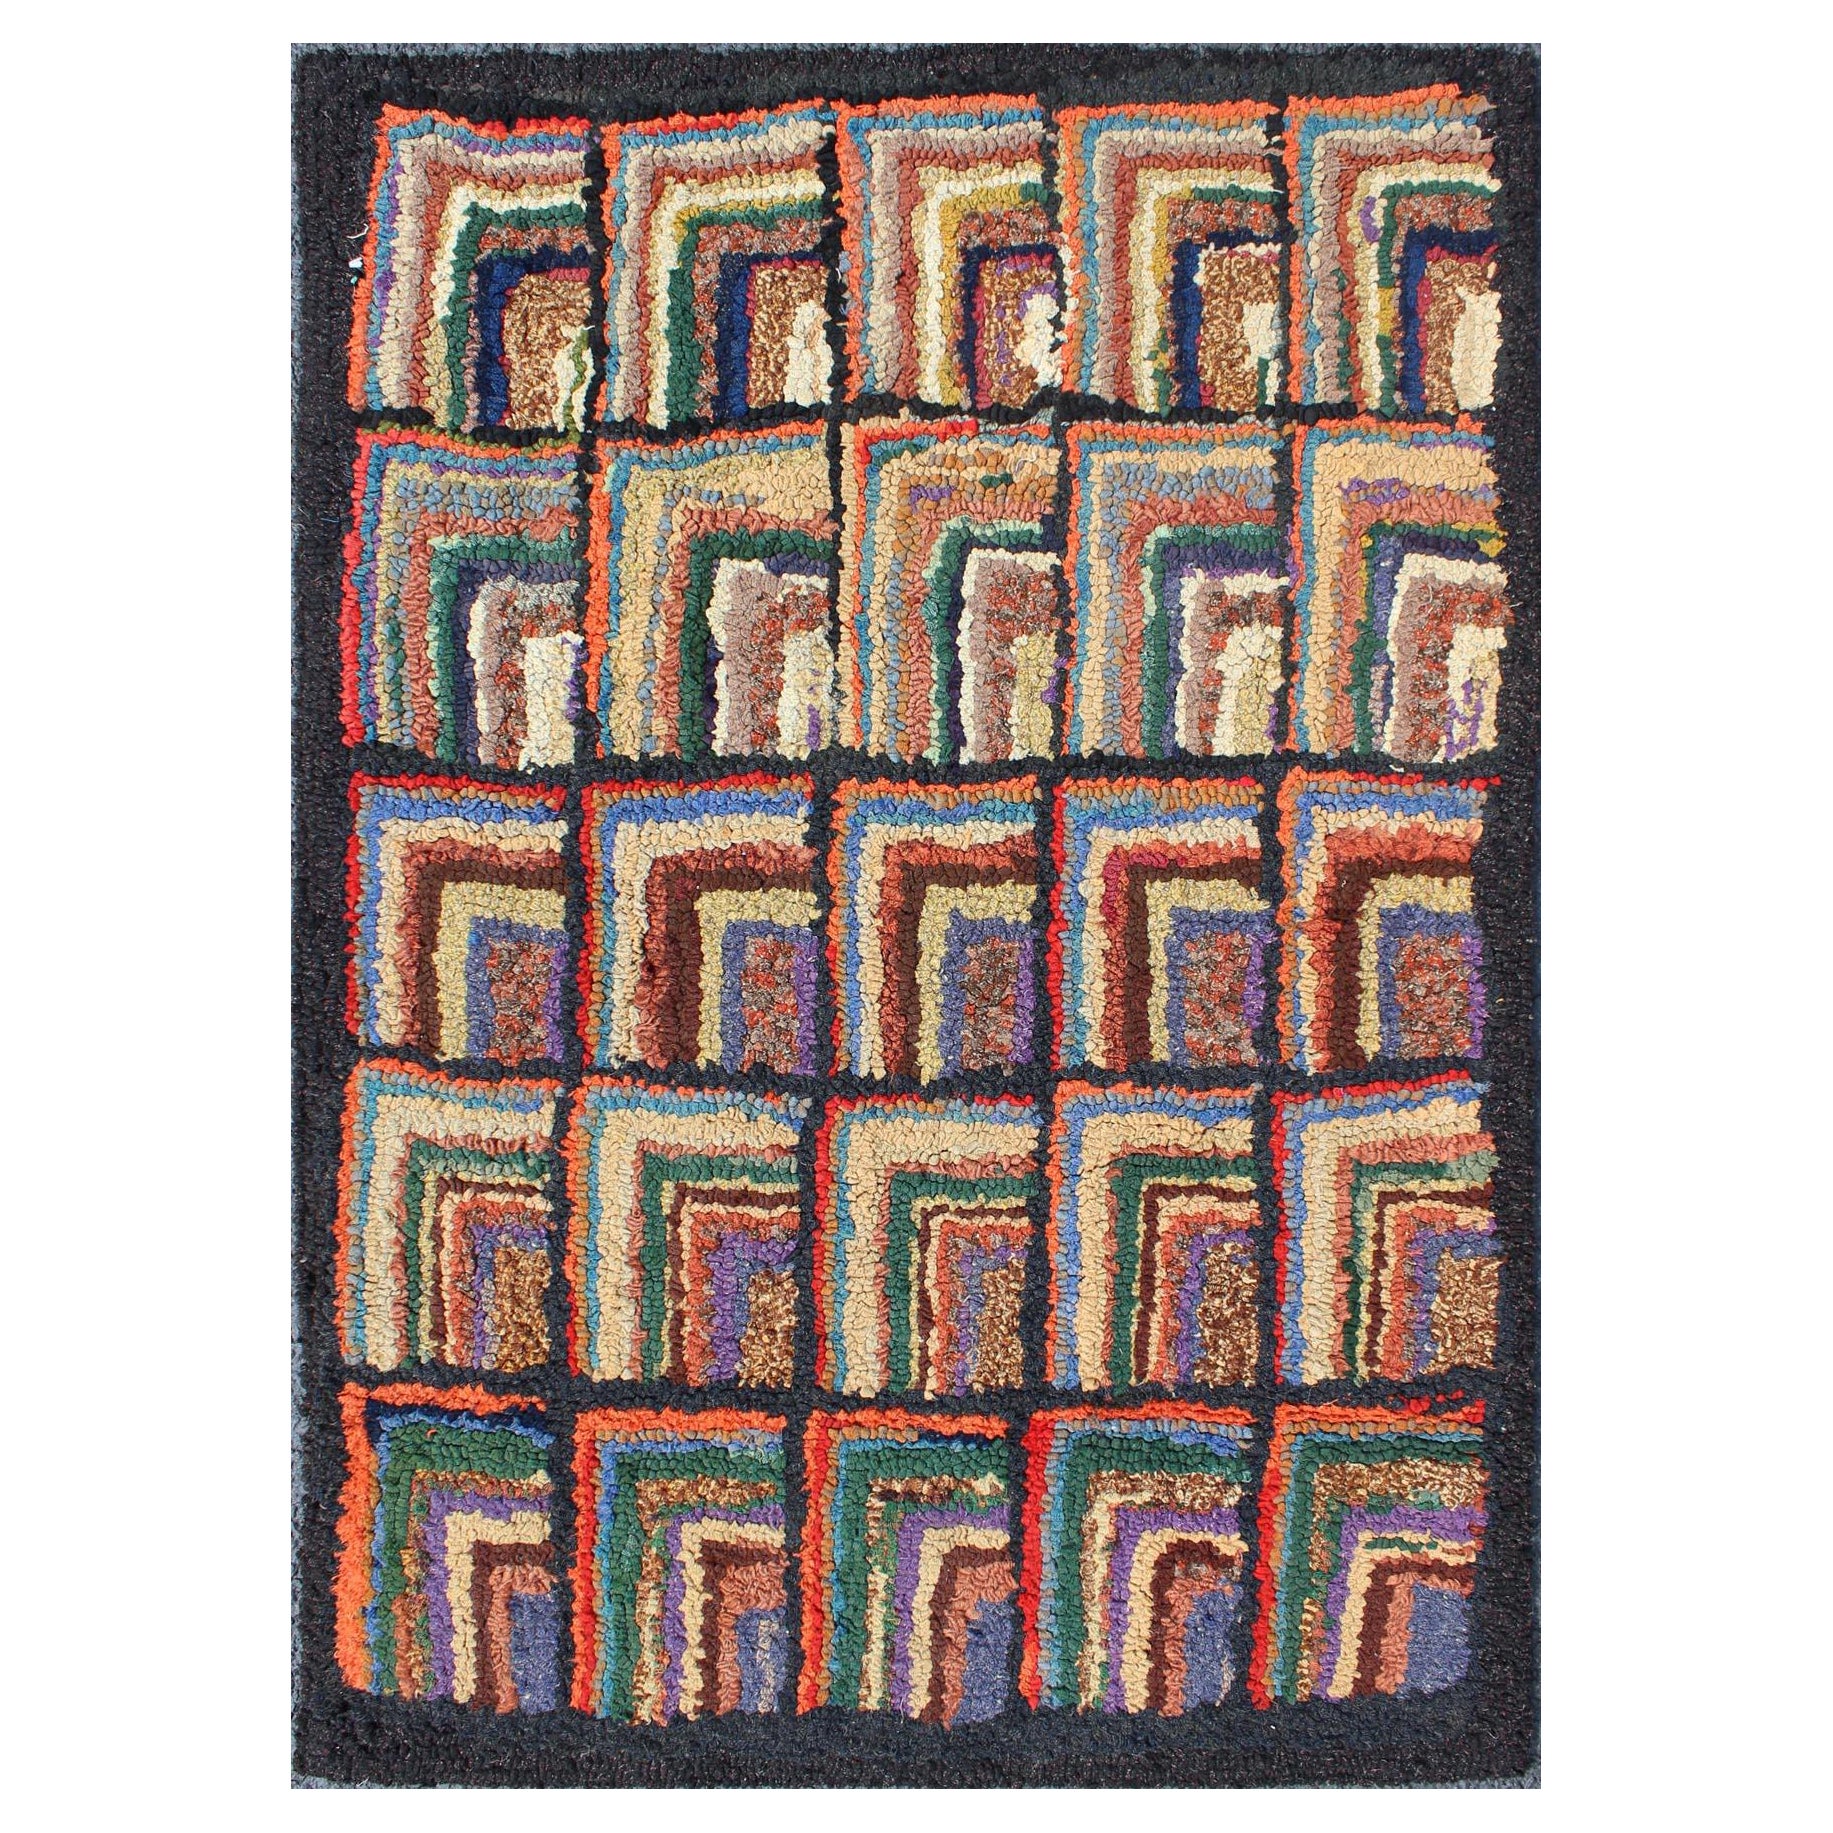 Checkerboard Antique American Hooked Rug with Geometric Designs